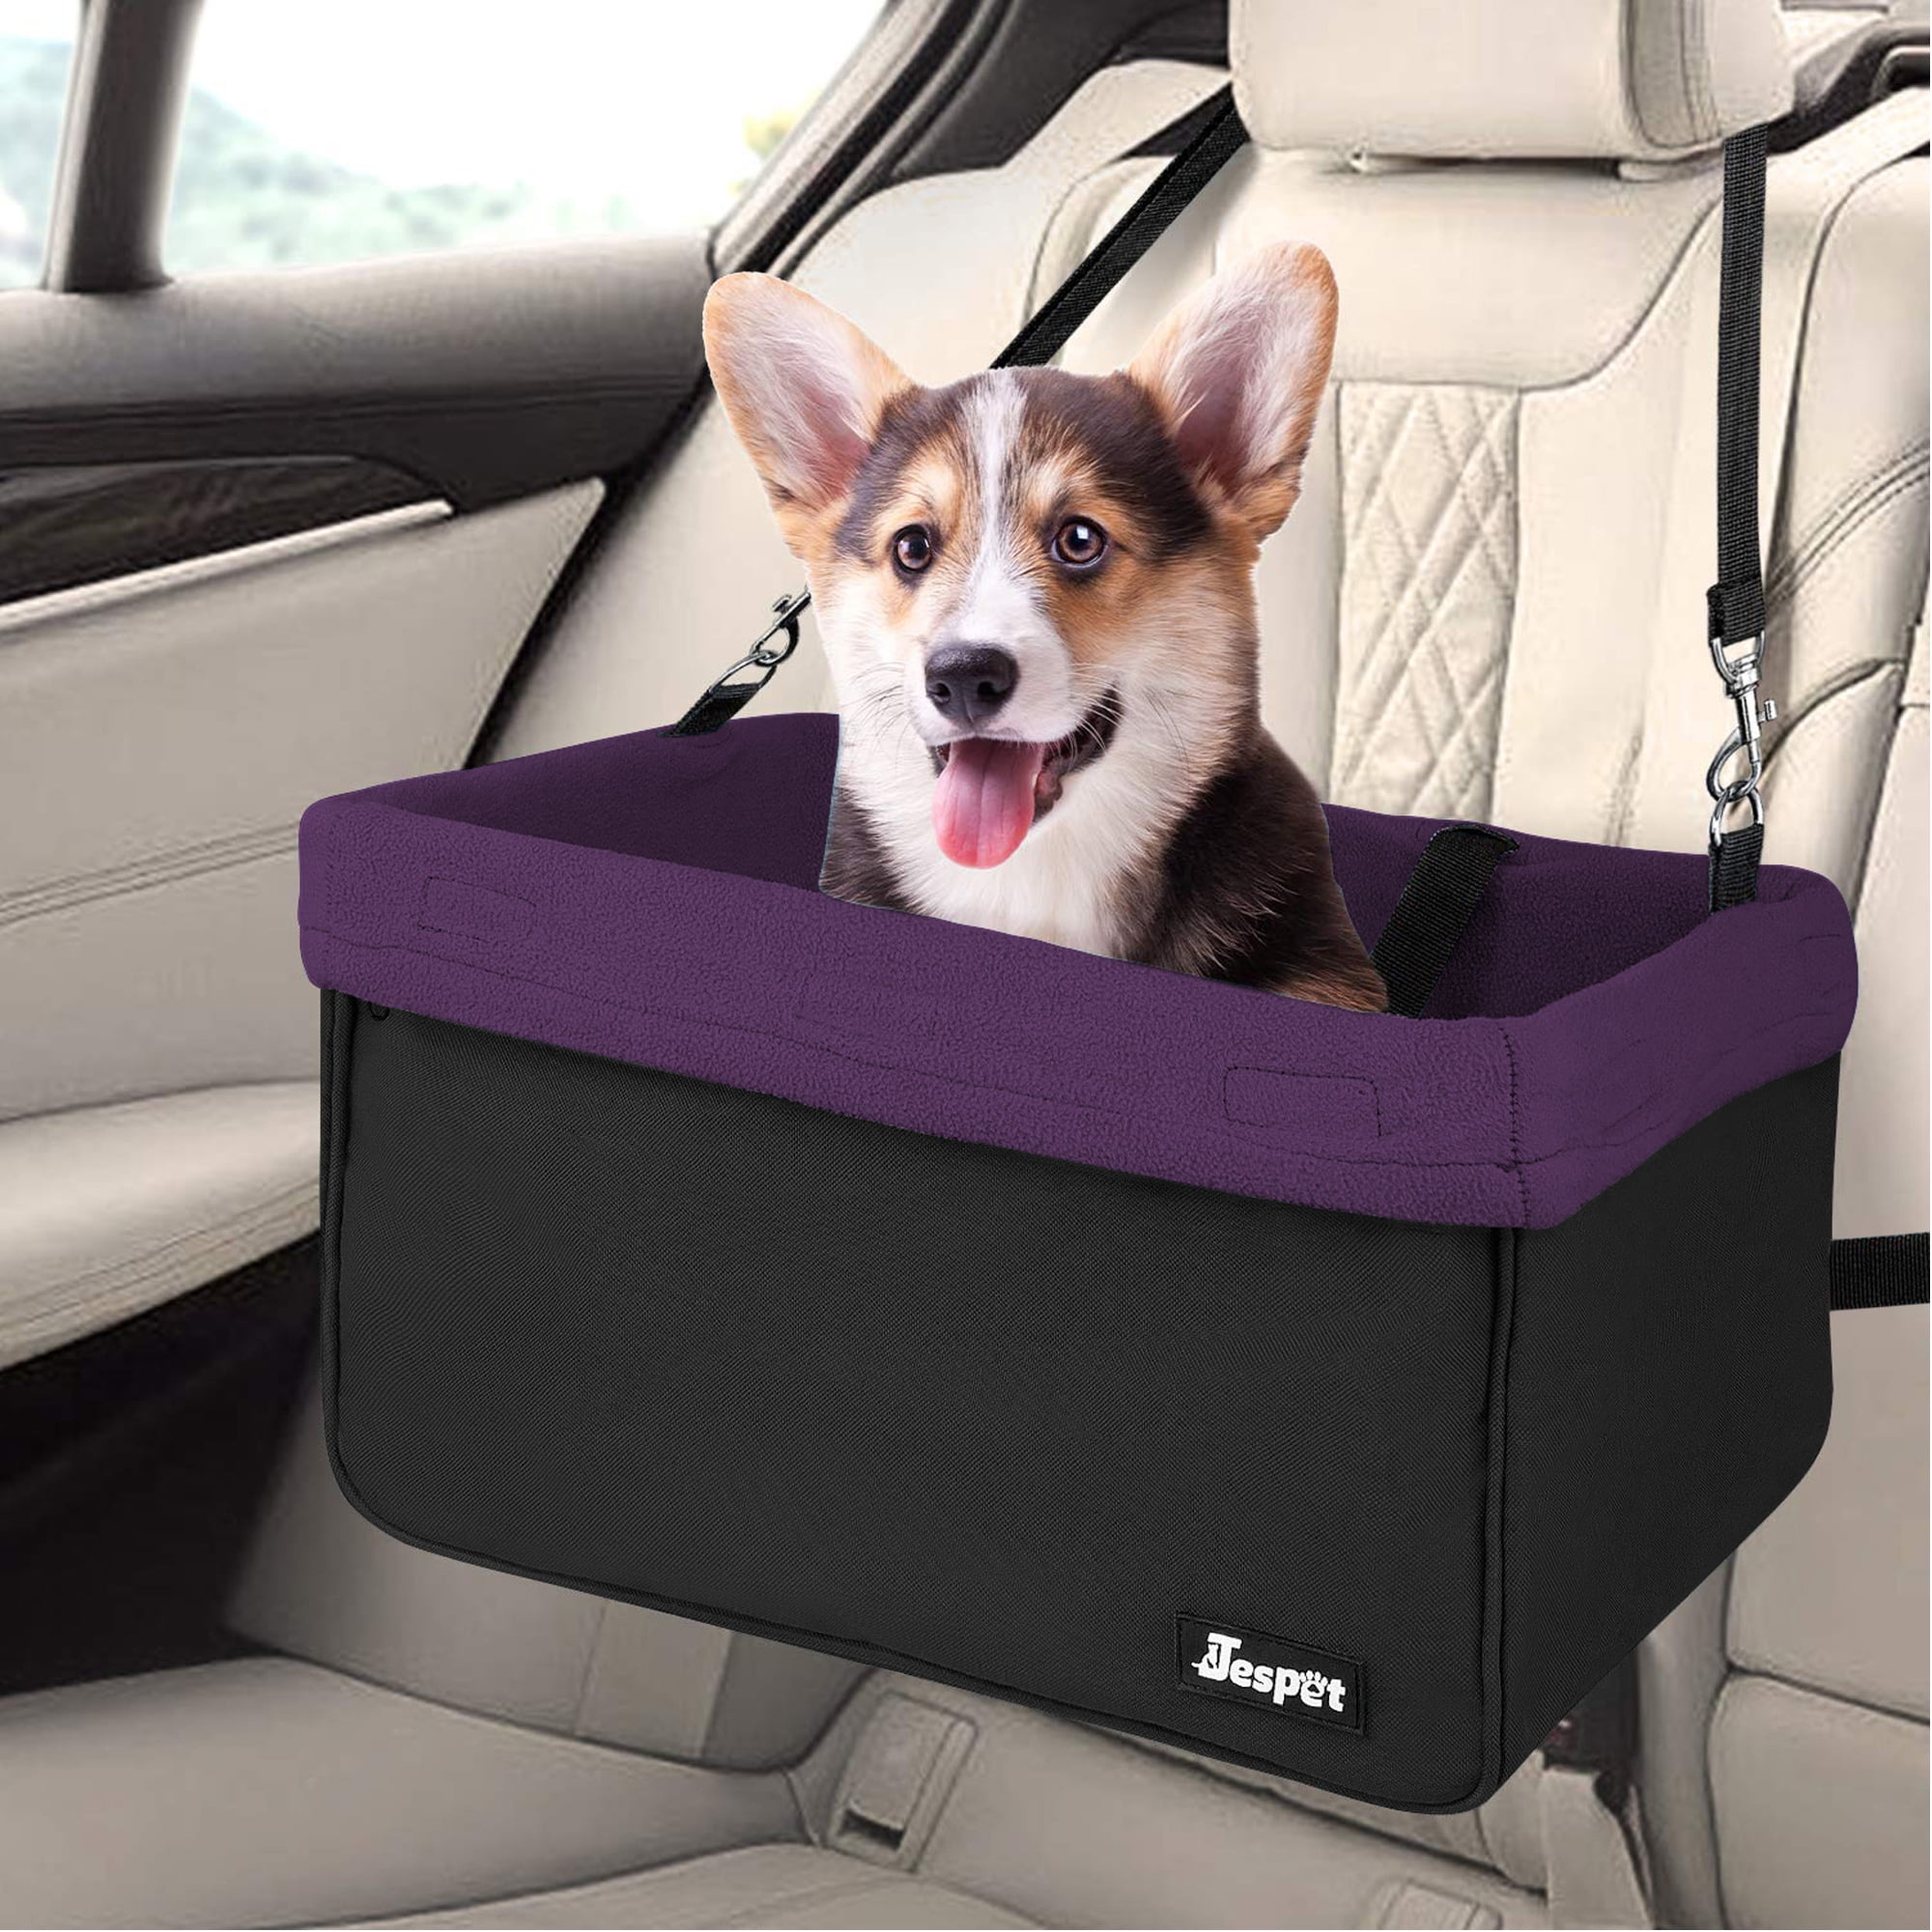 Bunty Dog Puppy Pet Cat Travel Booster Car Vehicle Seat Carrier Bag Protector Black 